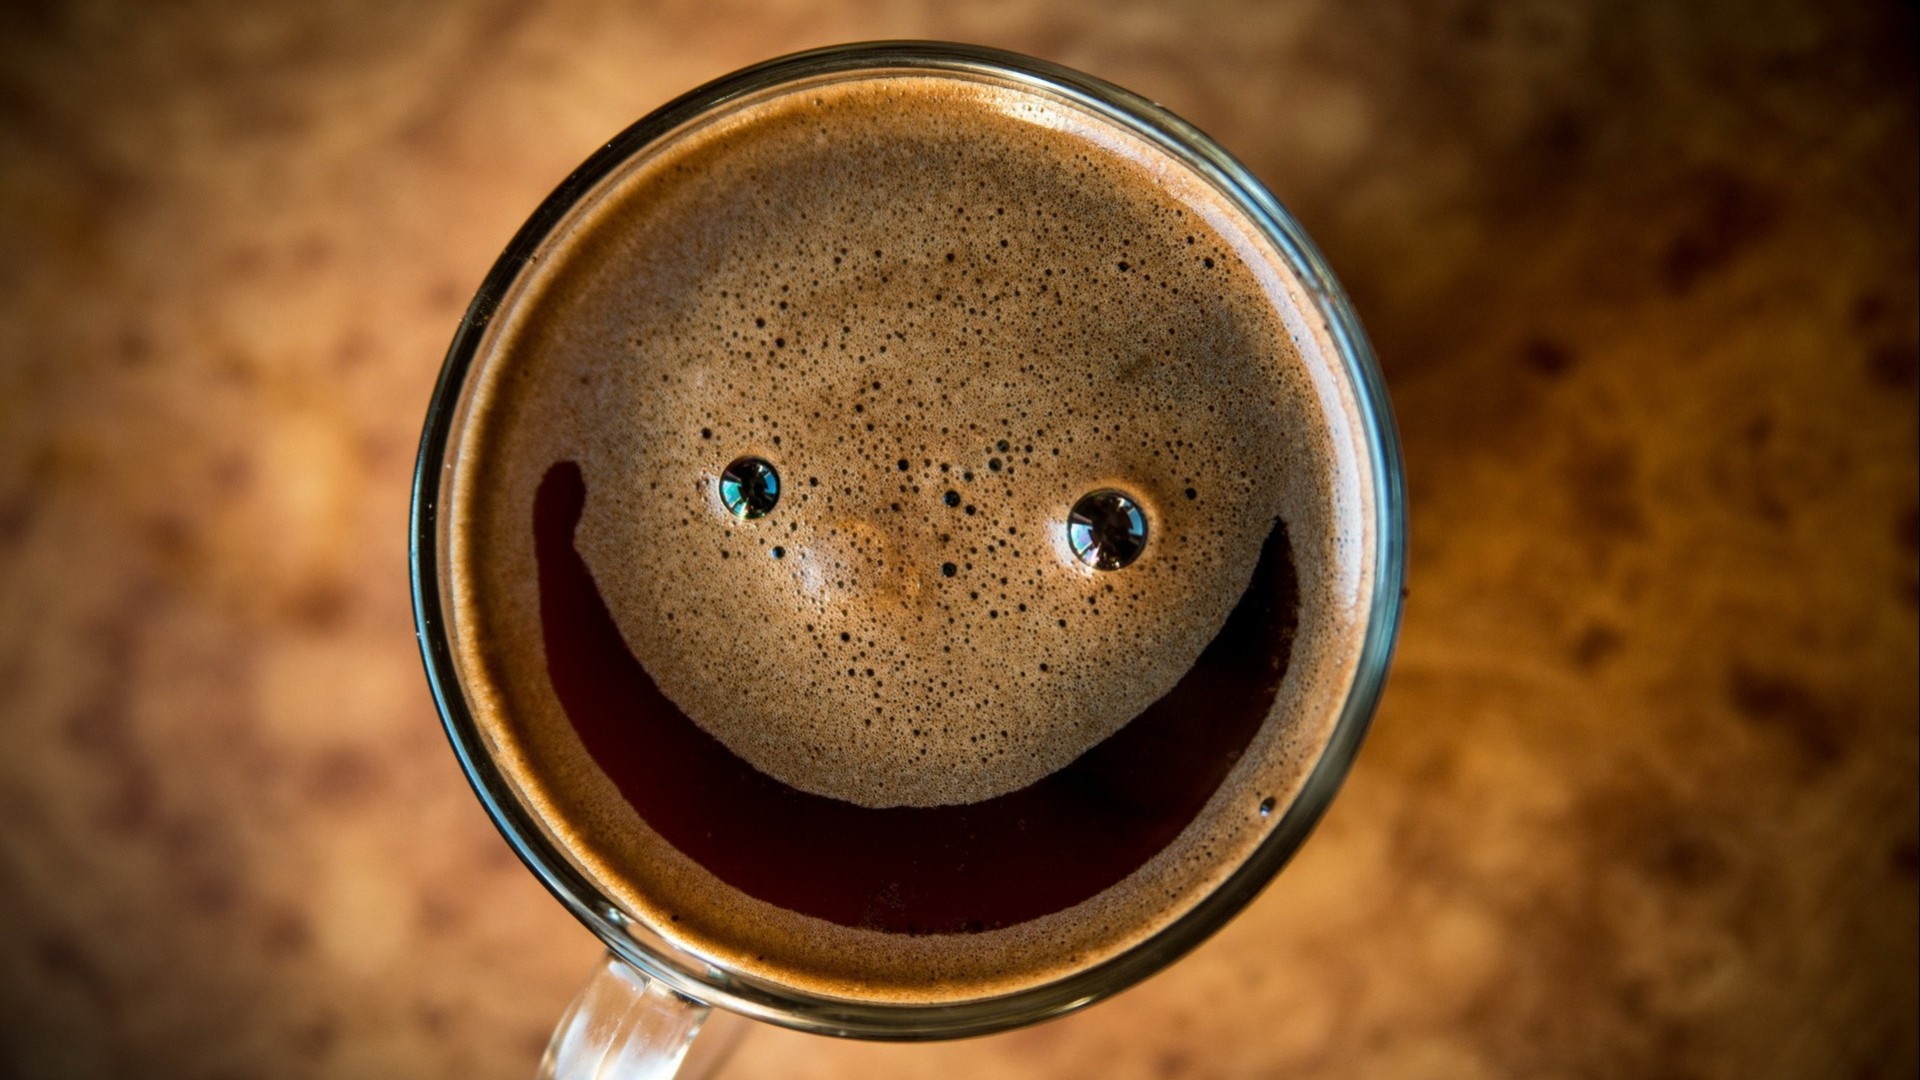 General 1920x1080 coffee top view smiling humor brown cup